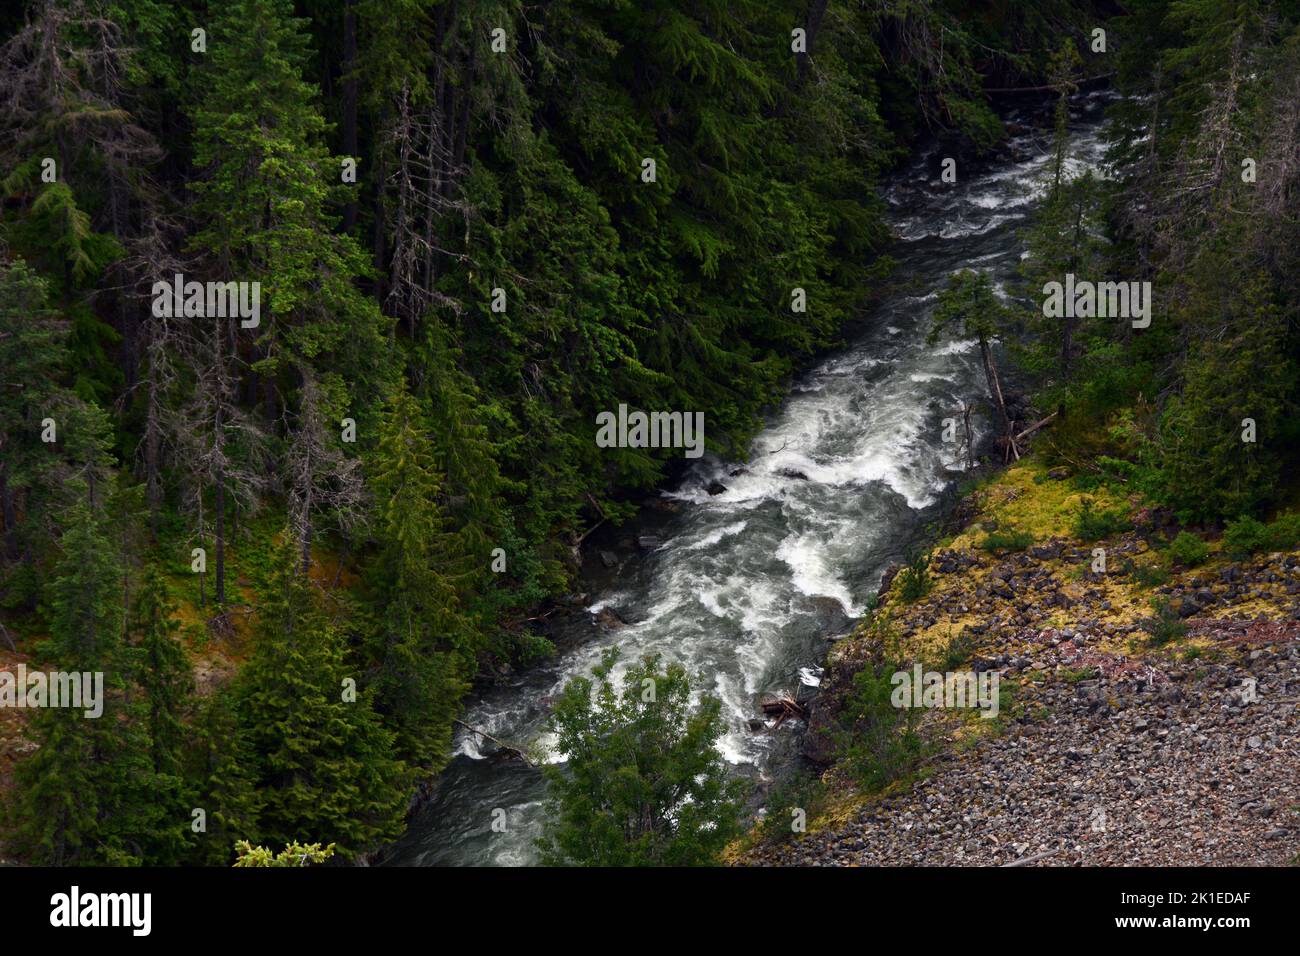 The Skagit River flowing through Skagit Valley Provincial Park in the North Cascades mountain range, British Columbia, Canada. Stock Photo